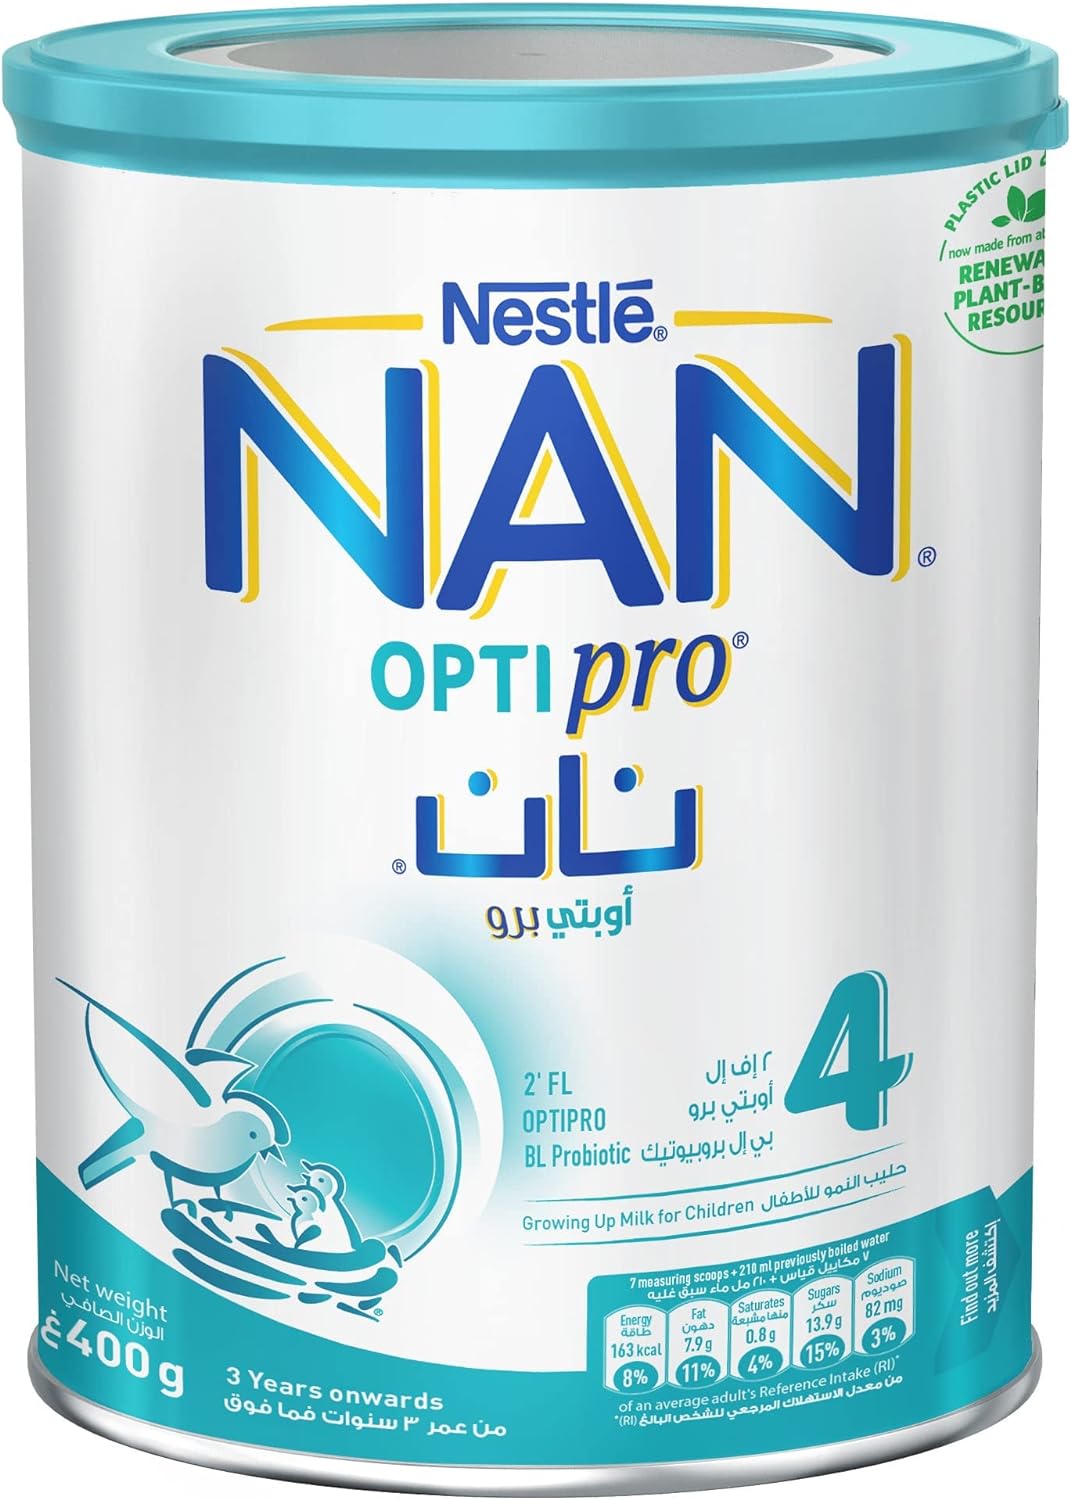 Nestle NAN Optipro Stage 4, From 3 to 6 Years, 400g